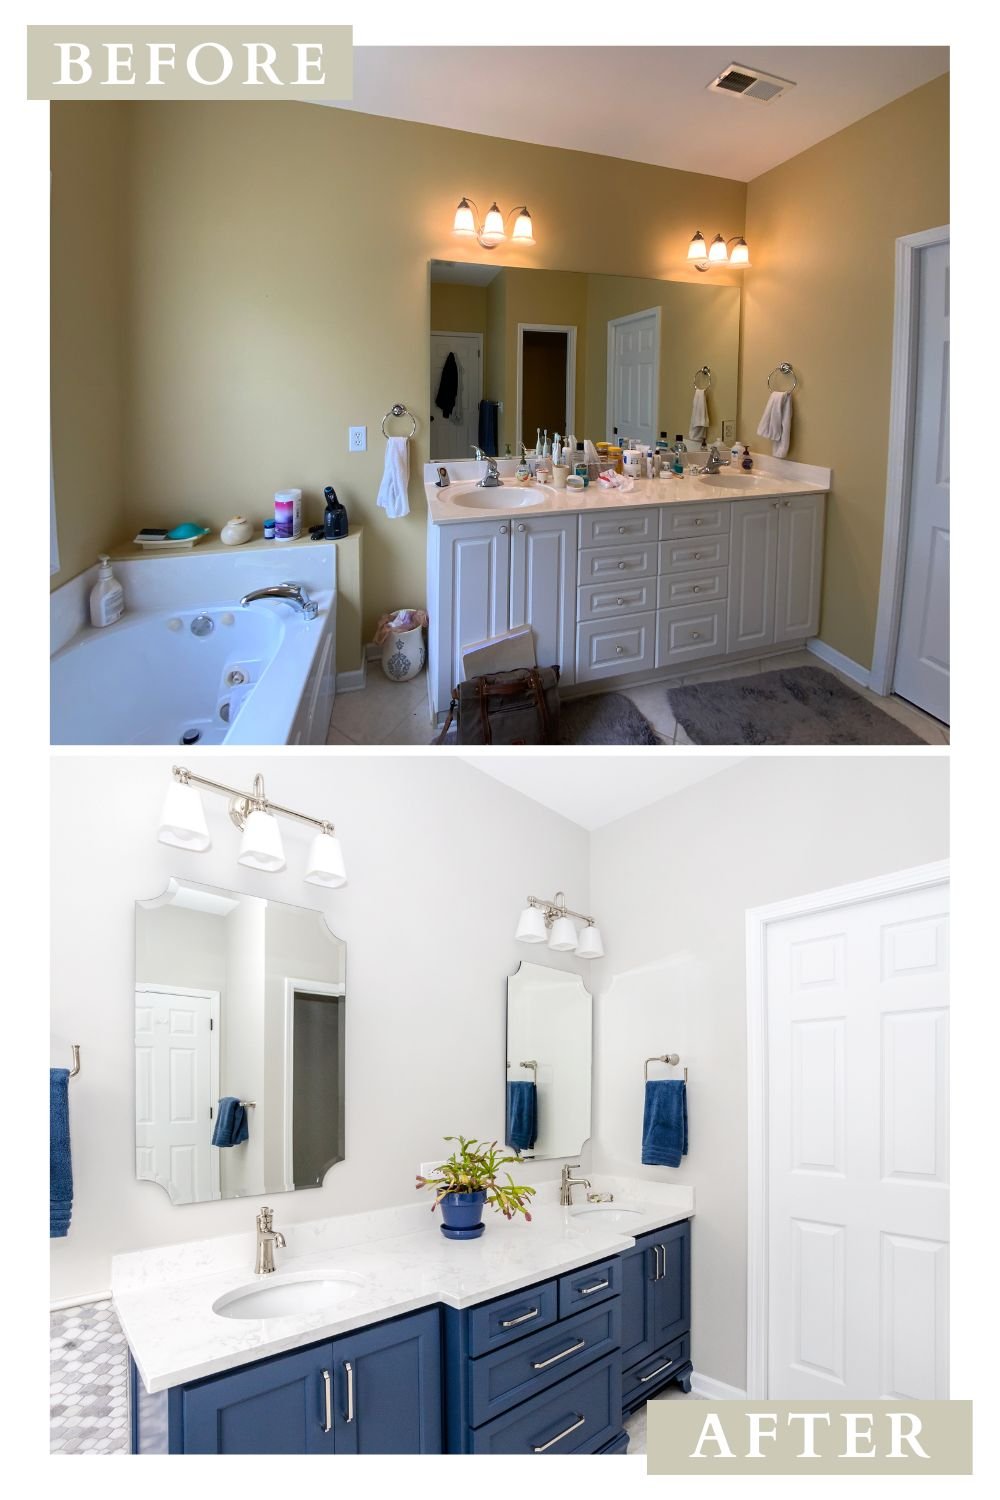 Bathroom Makeover Day 11: How To Paint A Bathtub - Addicted 2 Decorating®